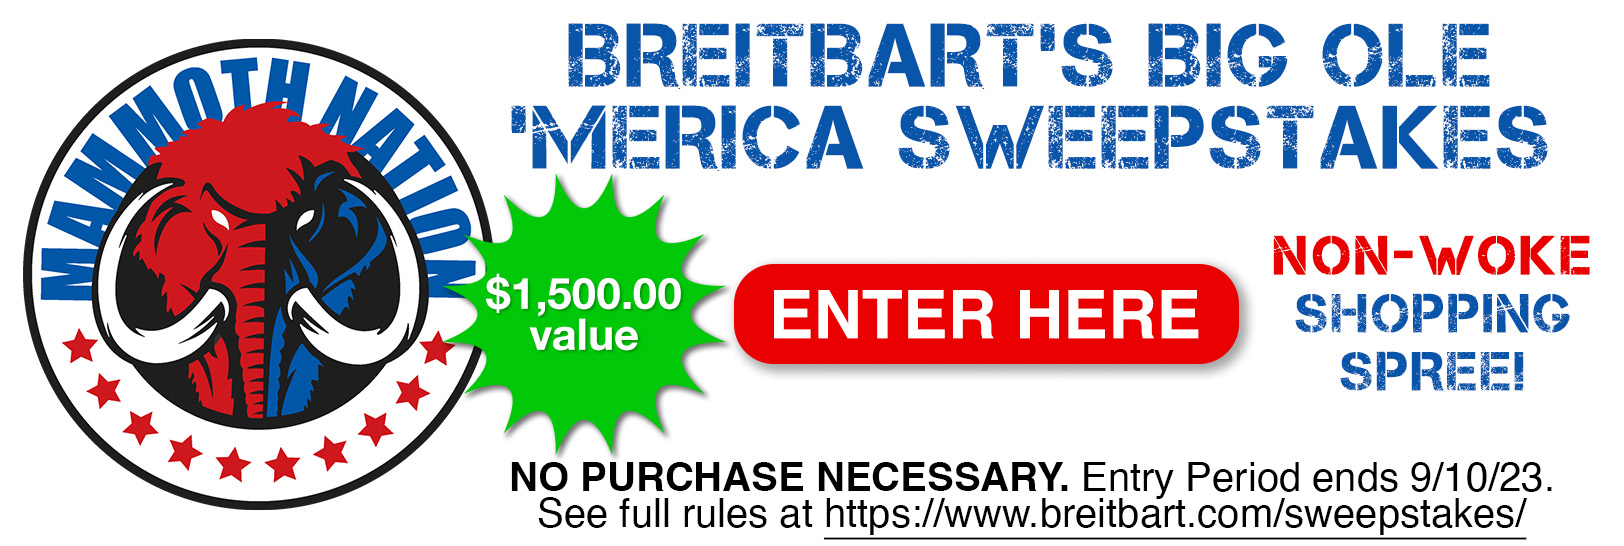 Meet the Winner of Breitbart’s First Installment of the Big Ole ‘Merica Sweepstakes